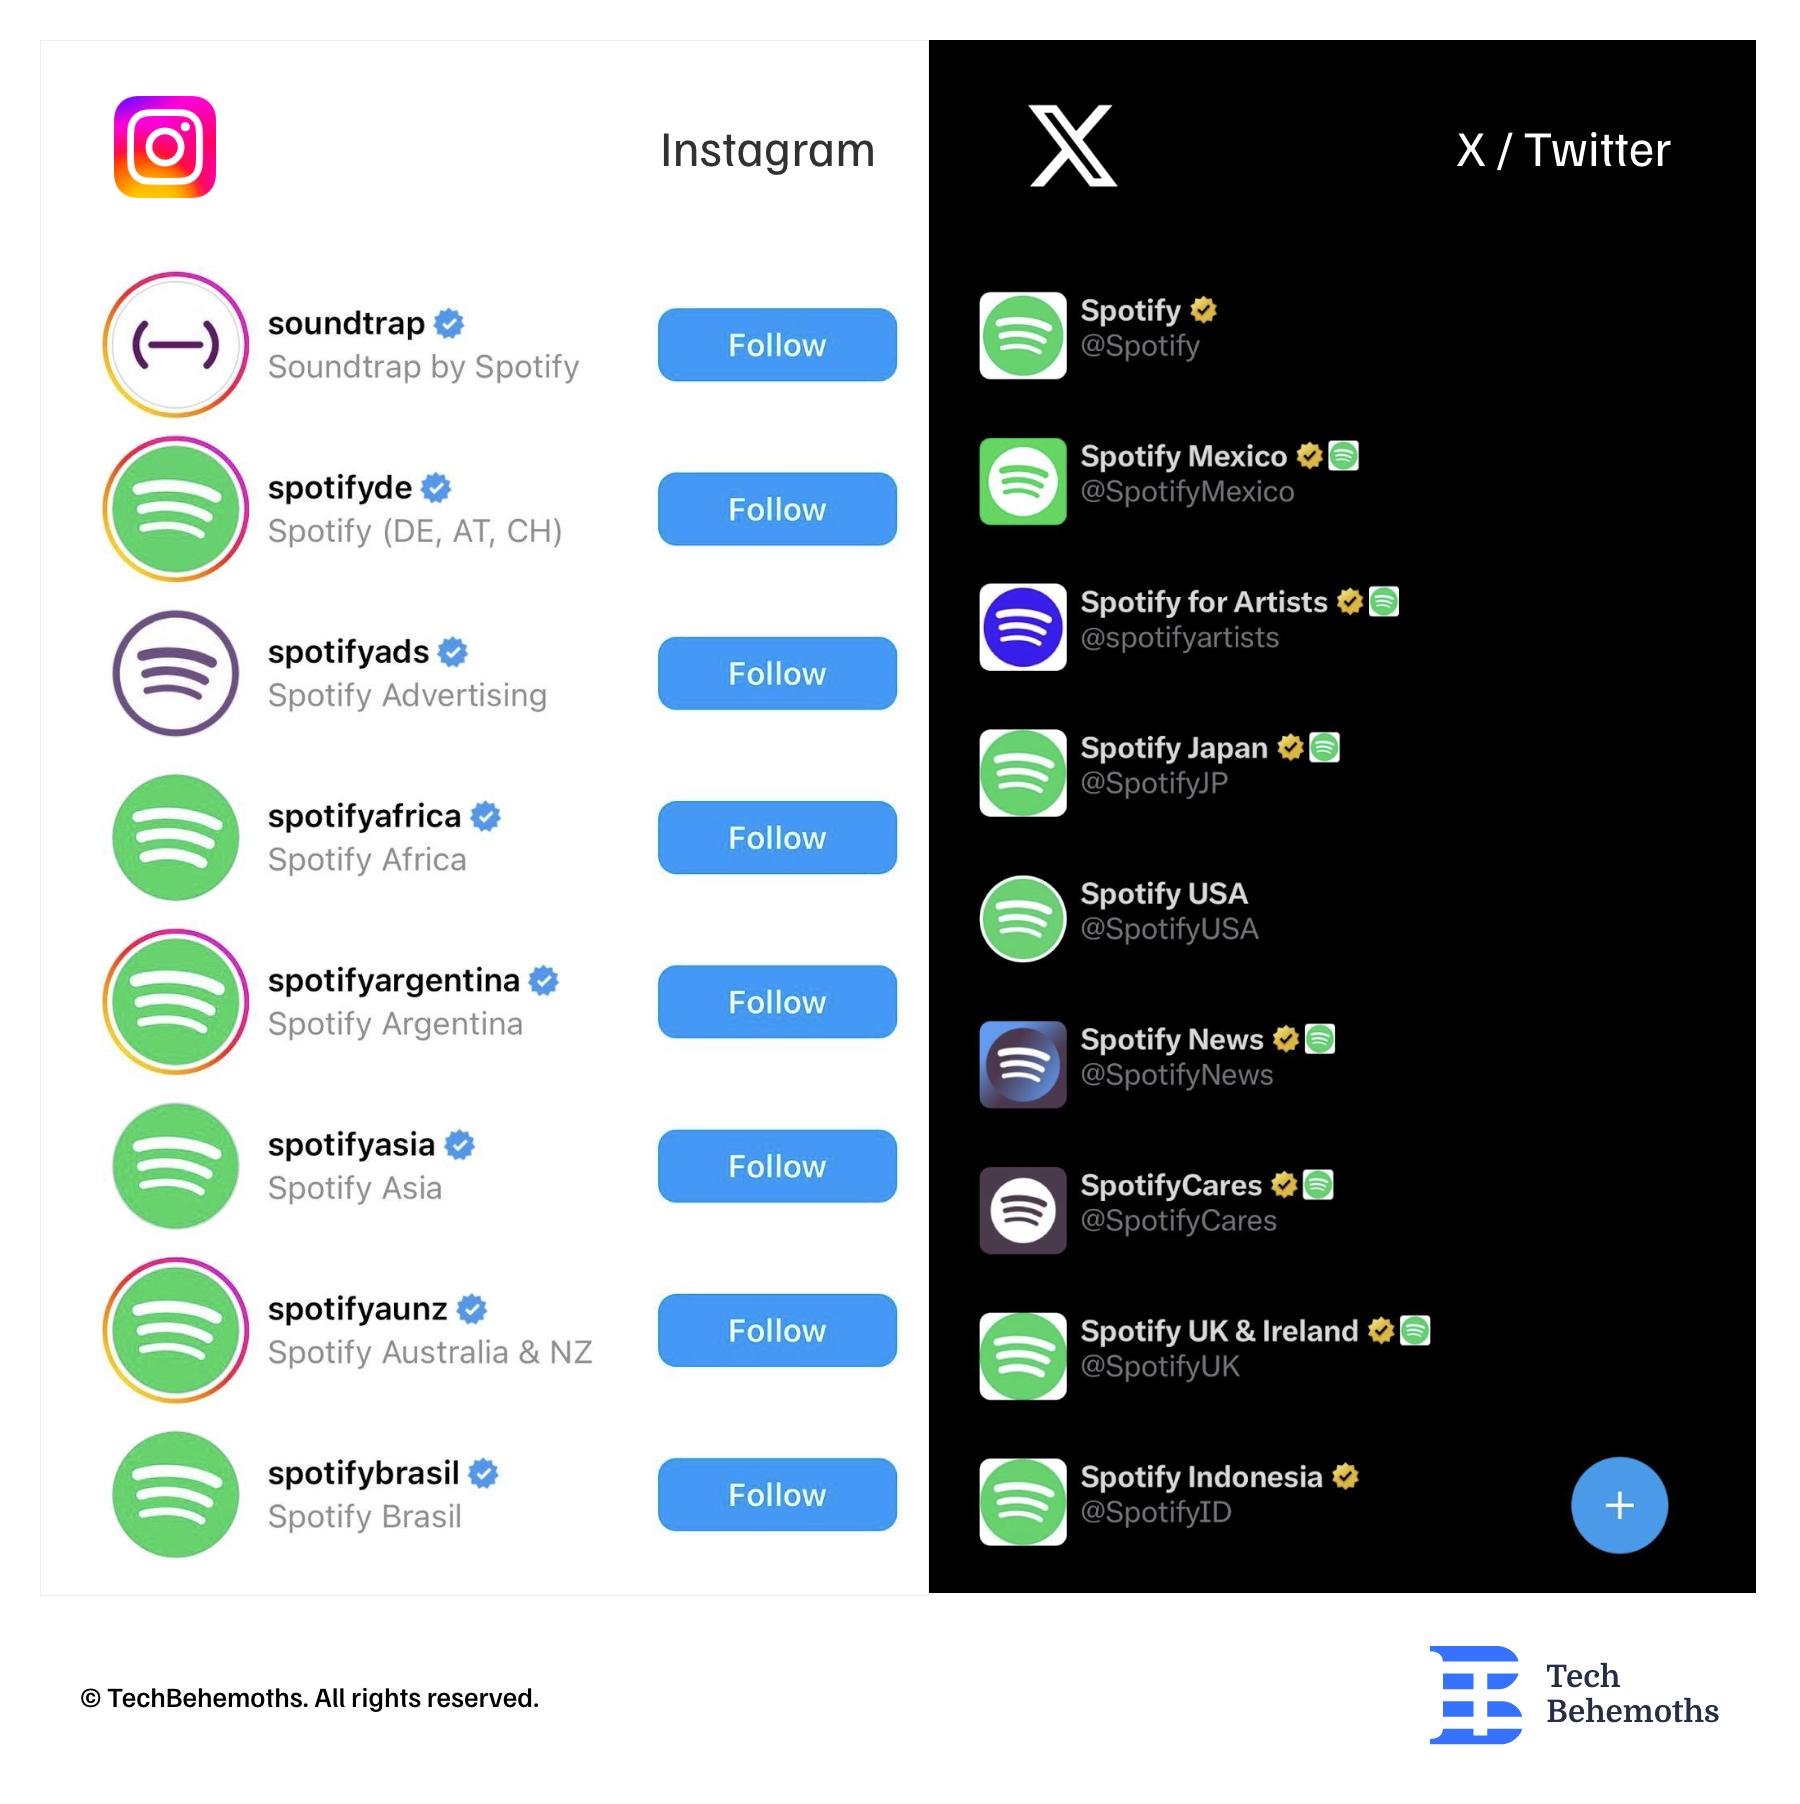 Spotify on Instagram and X